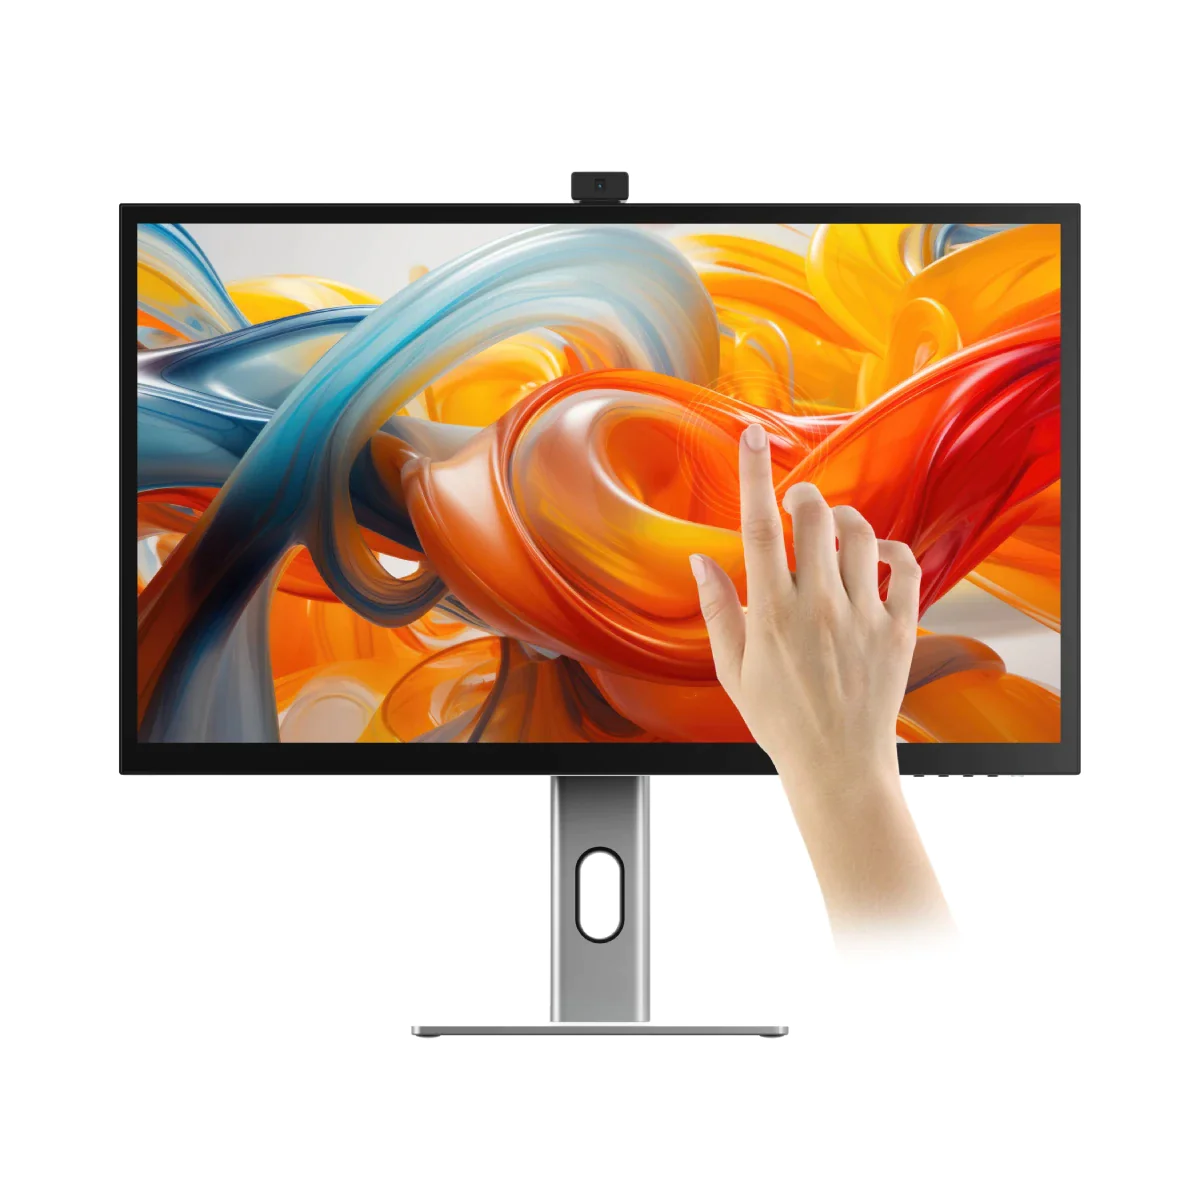 CLARITY 27” UHD 4K Monitor + Clarity Pro Touch 27" UHD 4K Monitor with 65W PD, Webcam and Touchscreen + Dual 4K Universal Docking Station – HDMI Edition